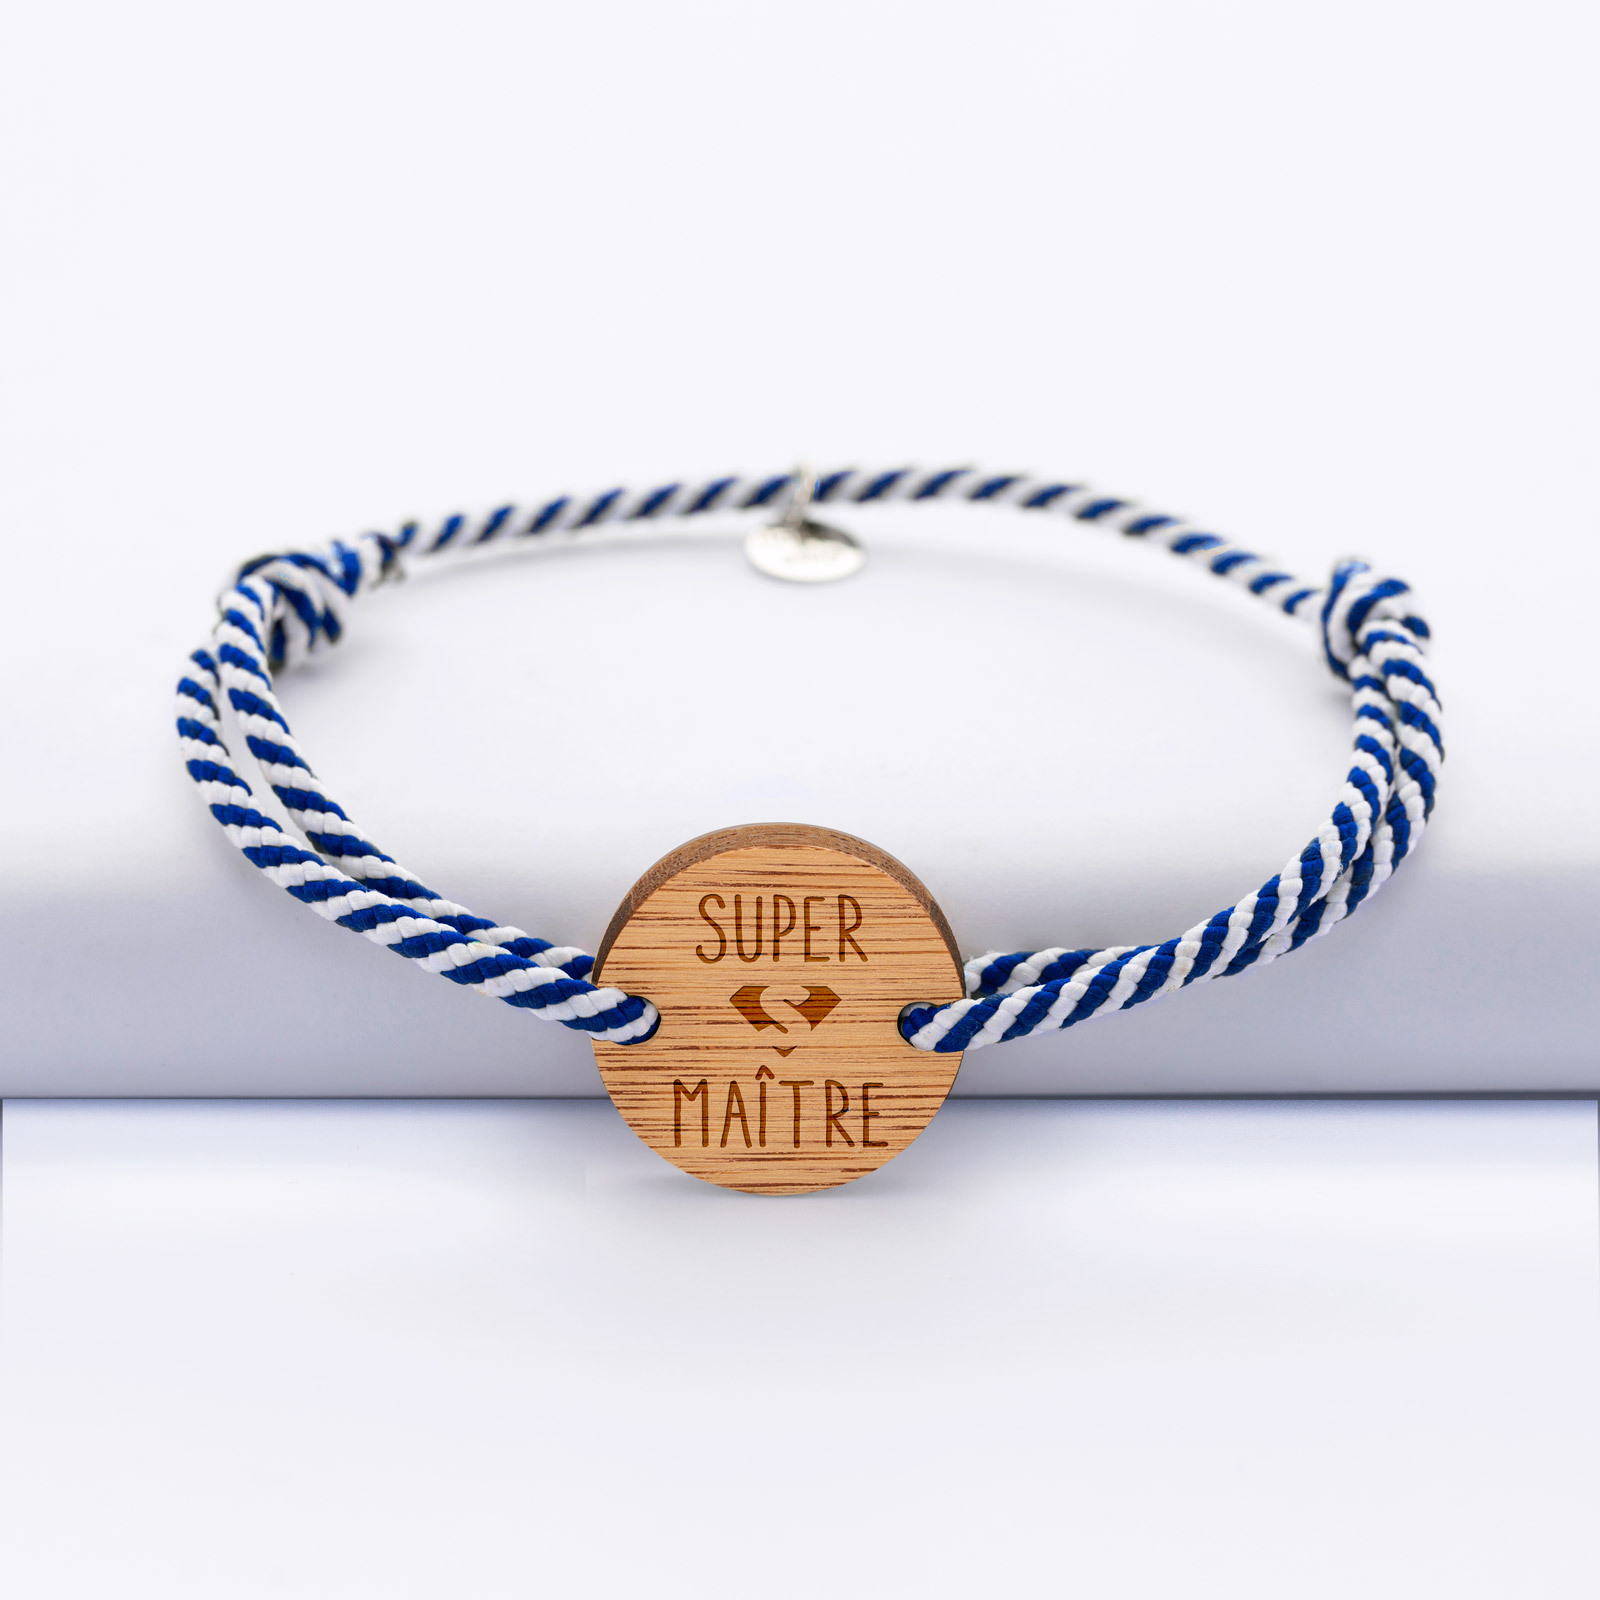 Personalised men's bracelet braided cord medallion engraved wood round 2 holes 21 mm - special edition "Super Maitre"